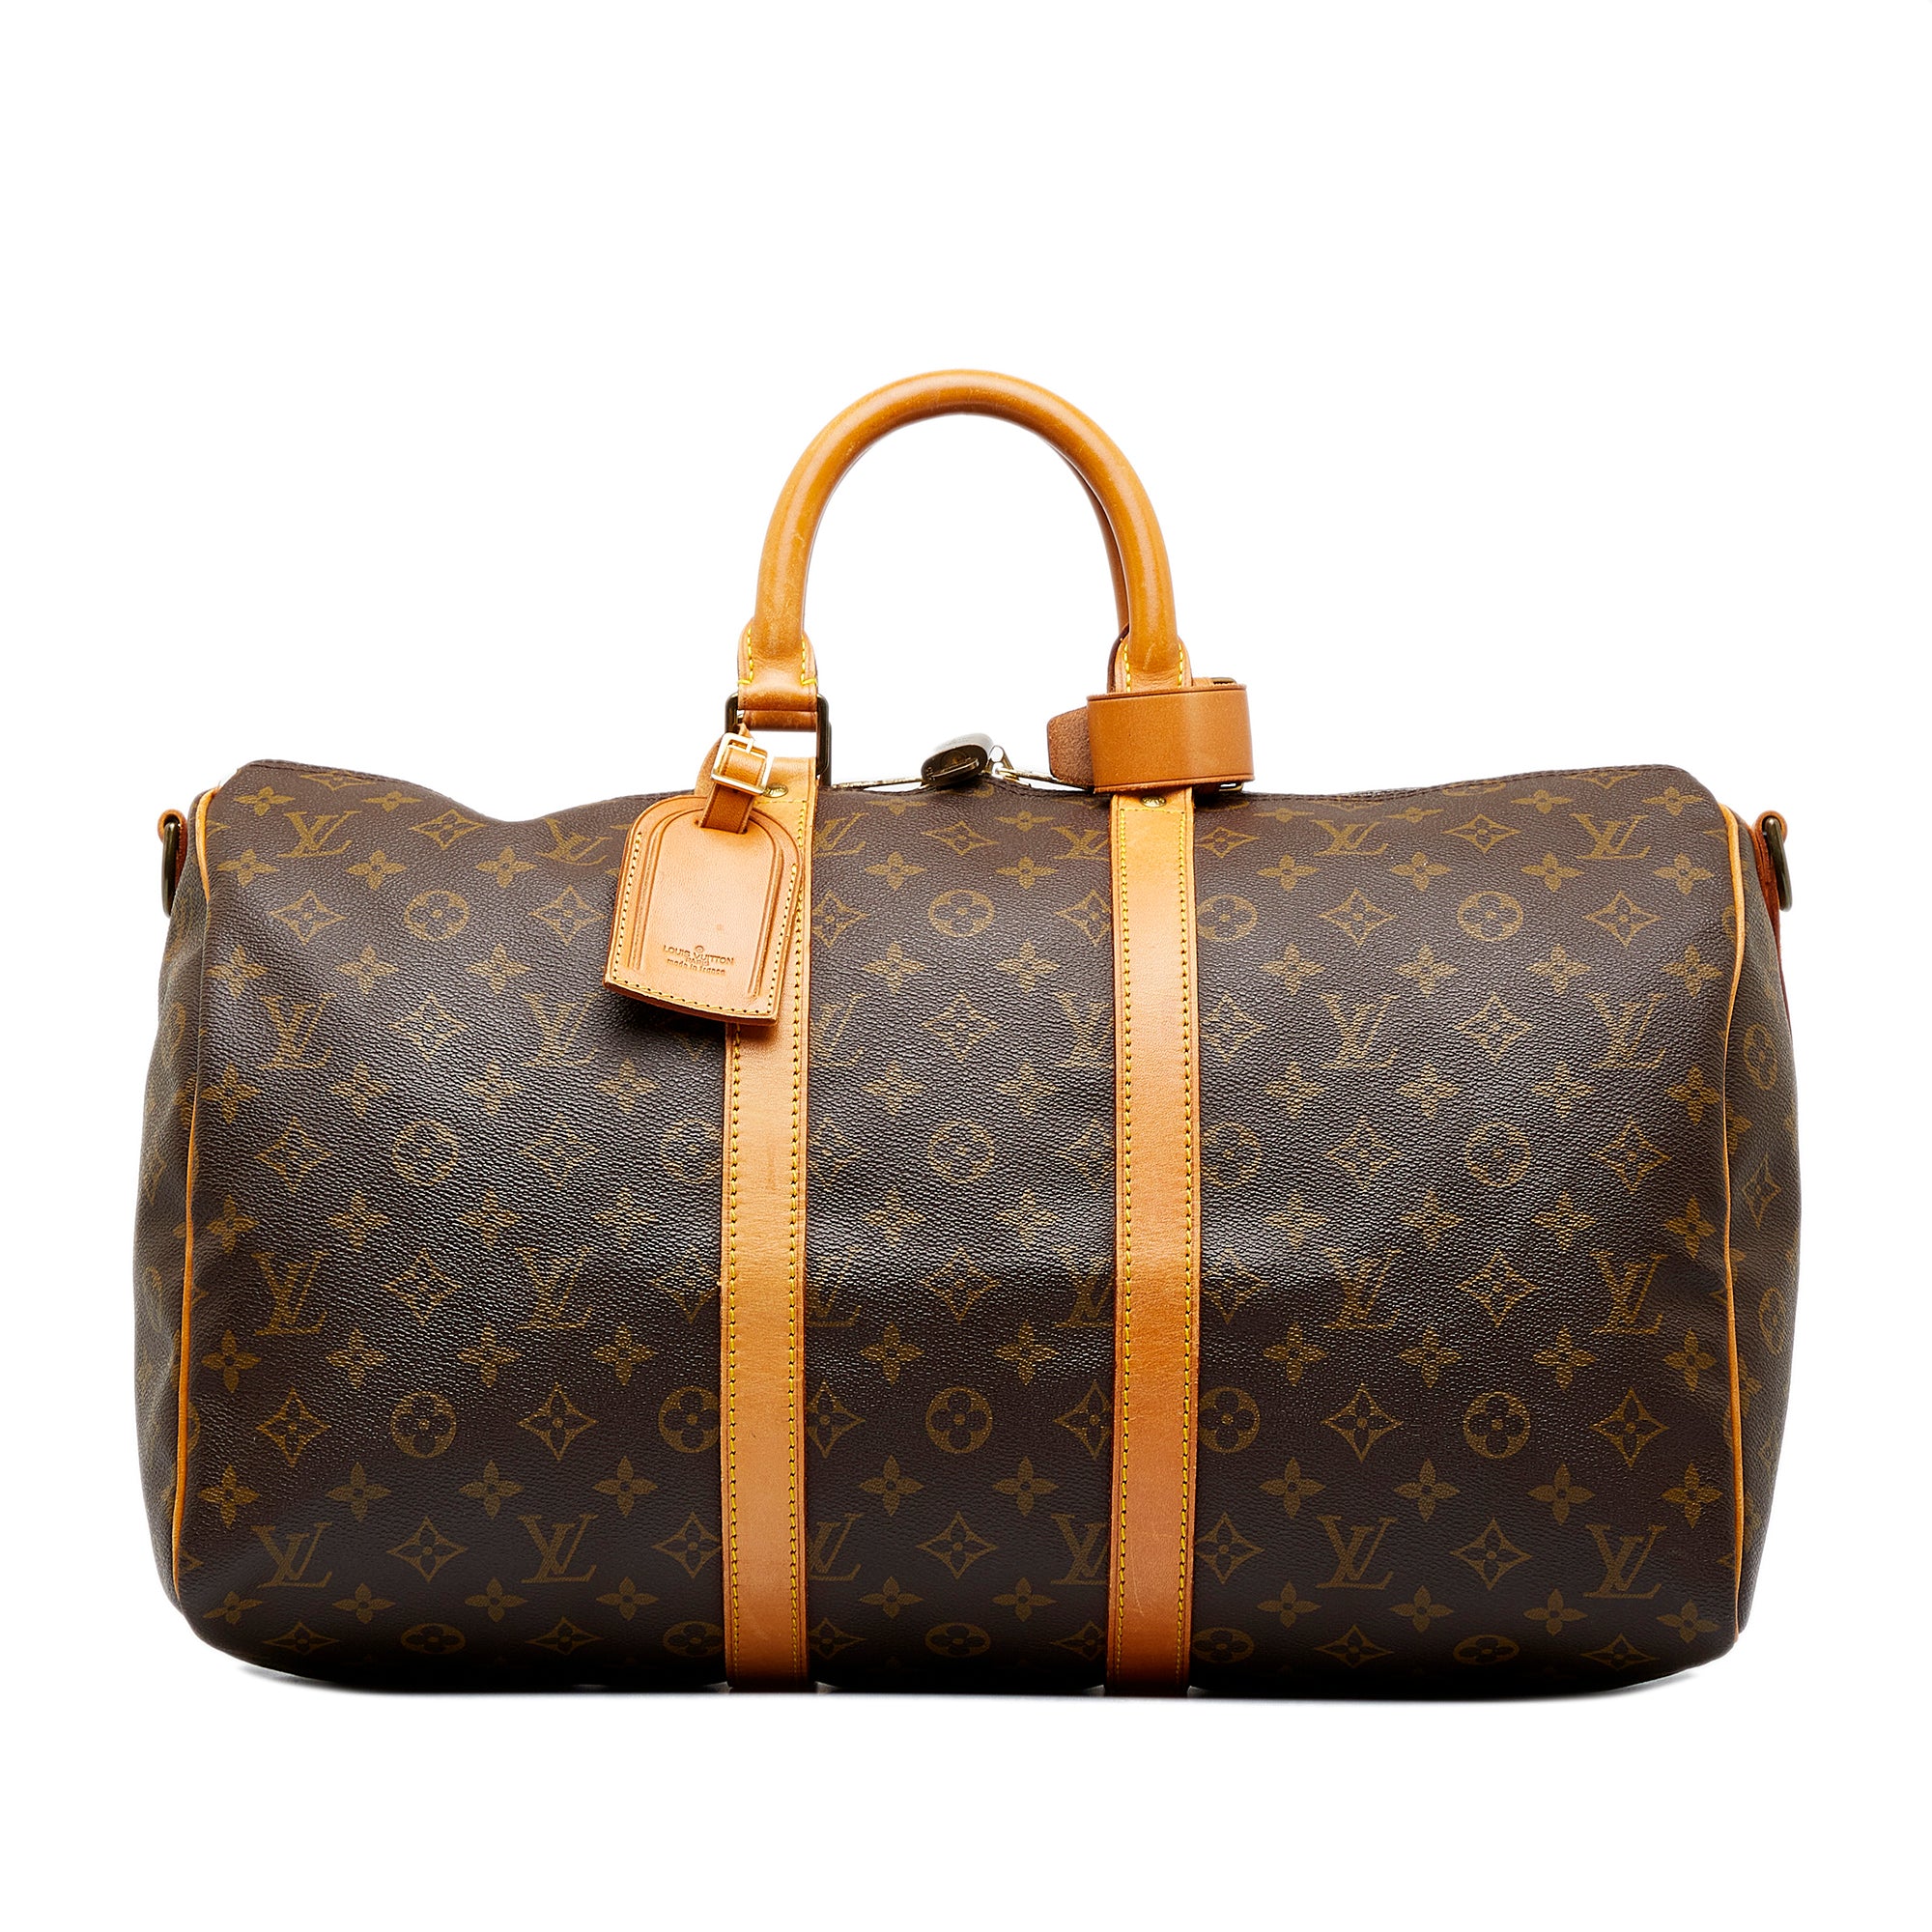 AUTHENTIC, PRE-OWNED] Louis Vuitton Monogram Keepall Bandouliere